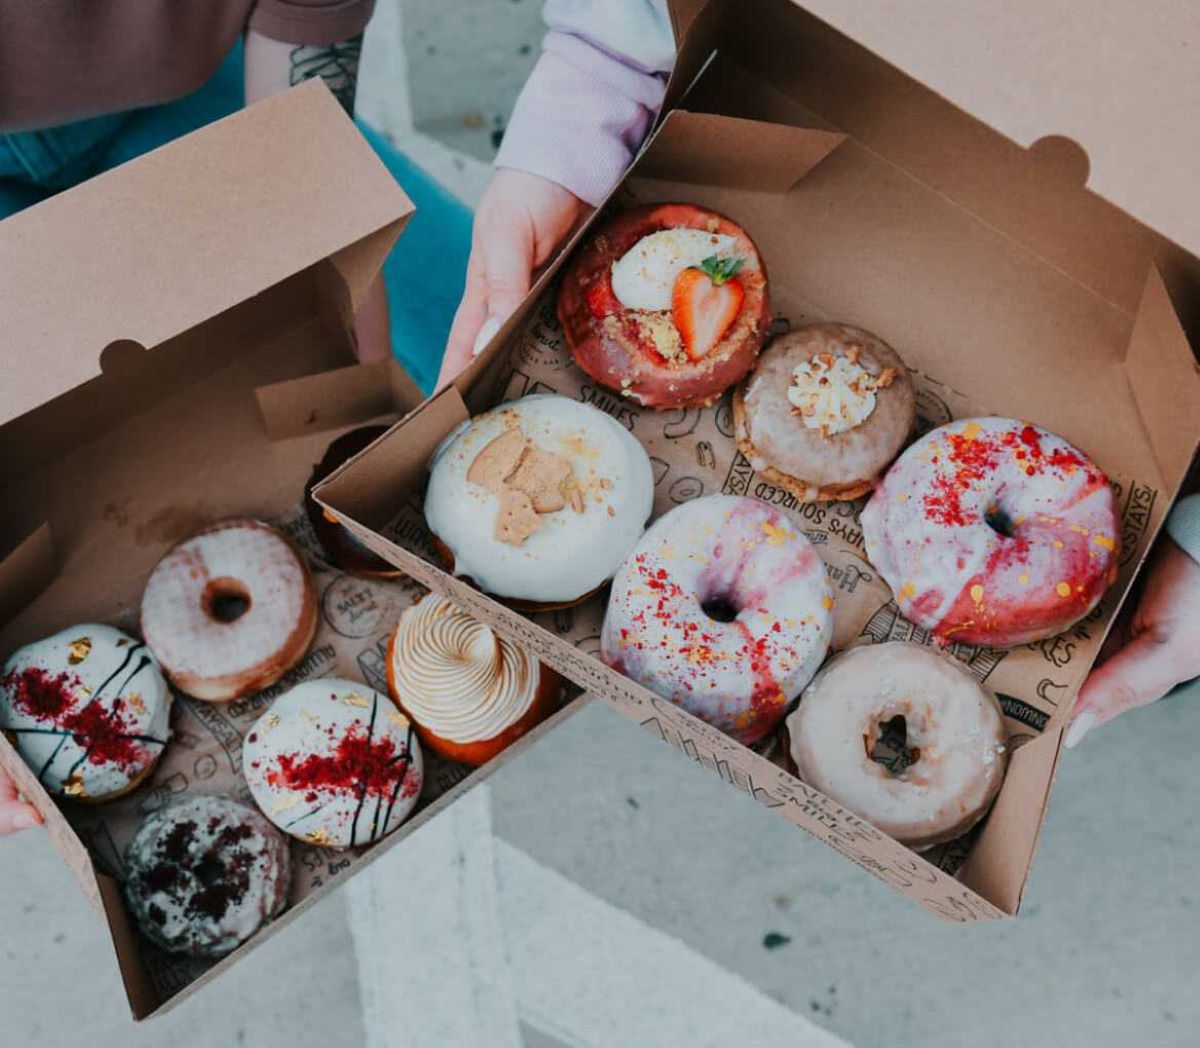 The Salty Donut Plans For a Third Location In West Midtown By Close Of 2023